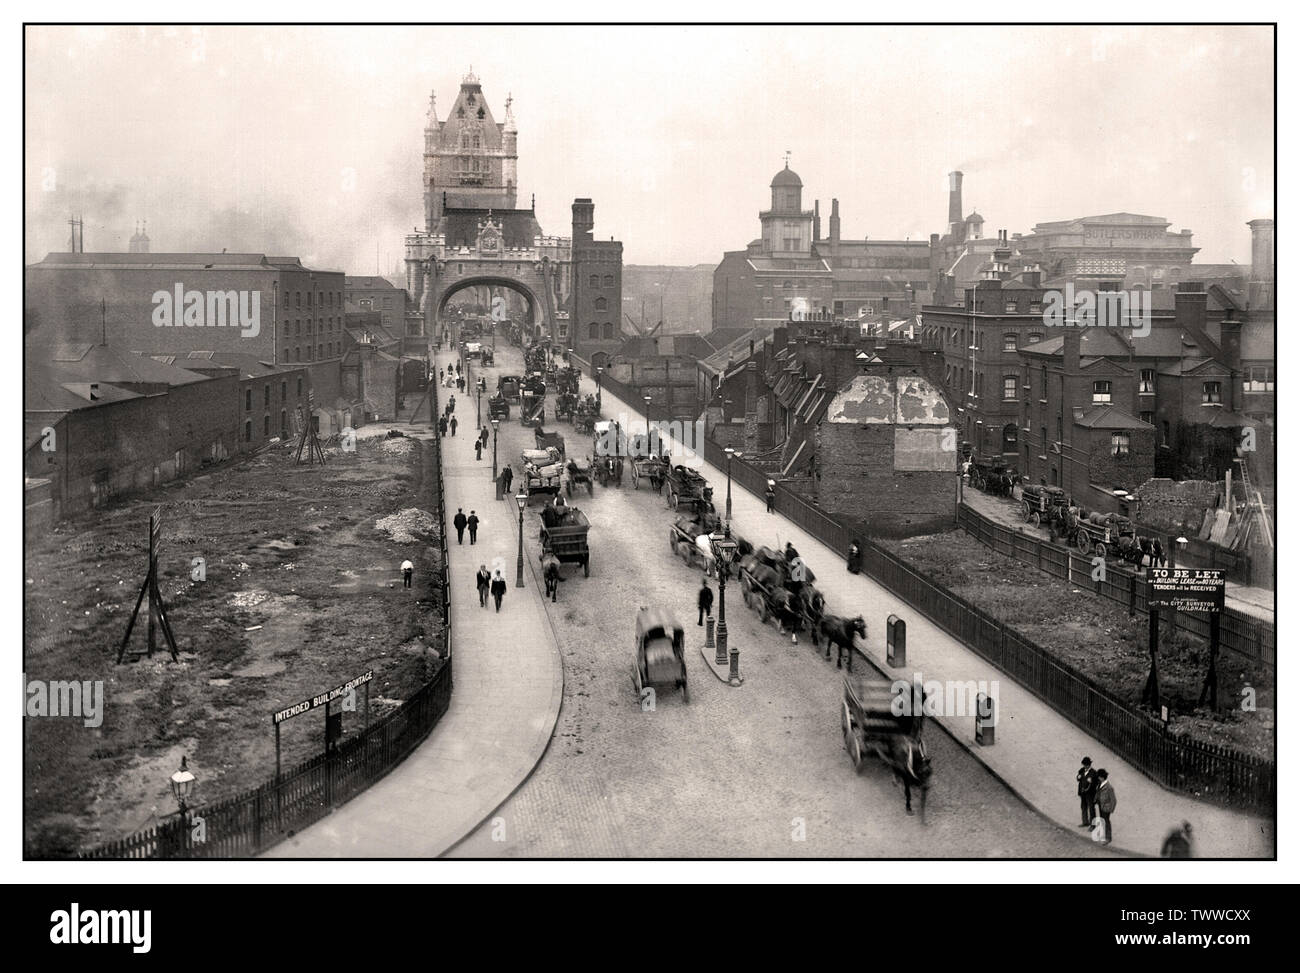 LONDON VINTAGE HISTORIC TOWER BRIDGE ROAD Vintage 1900’s Victorian era B&W image of Tower Bridge and area showing a variety of horse drawn carriages and industrial commercial transportations London UK Stock Photo